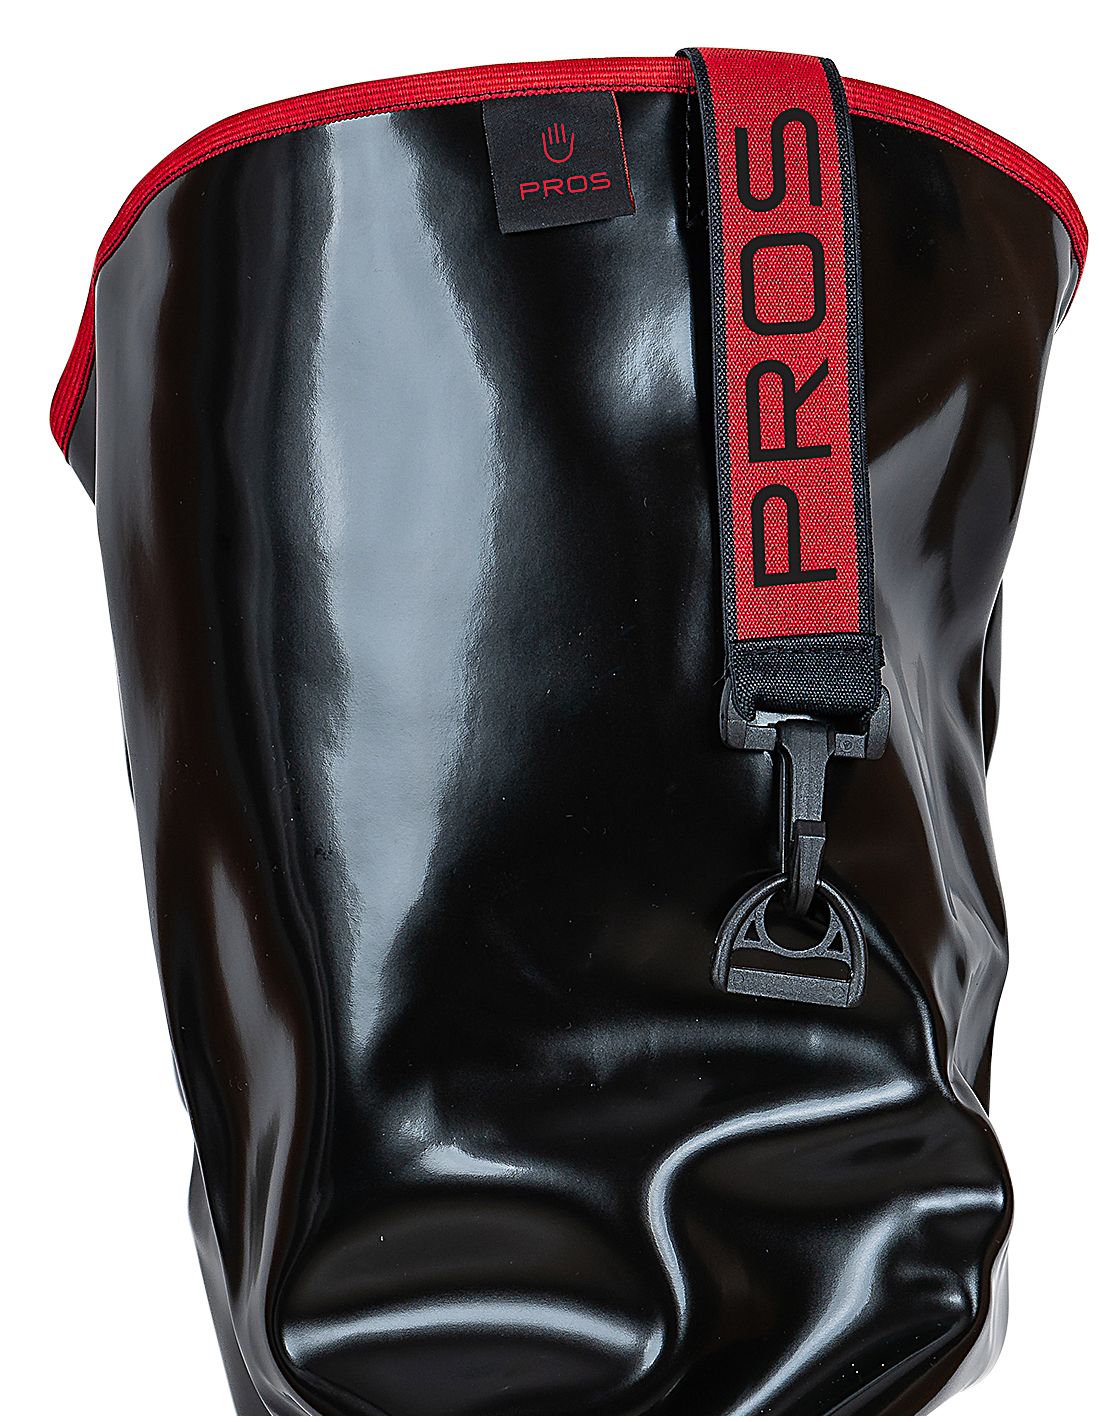 Thigh Waders STRONG - Black - PROS